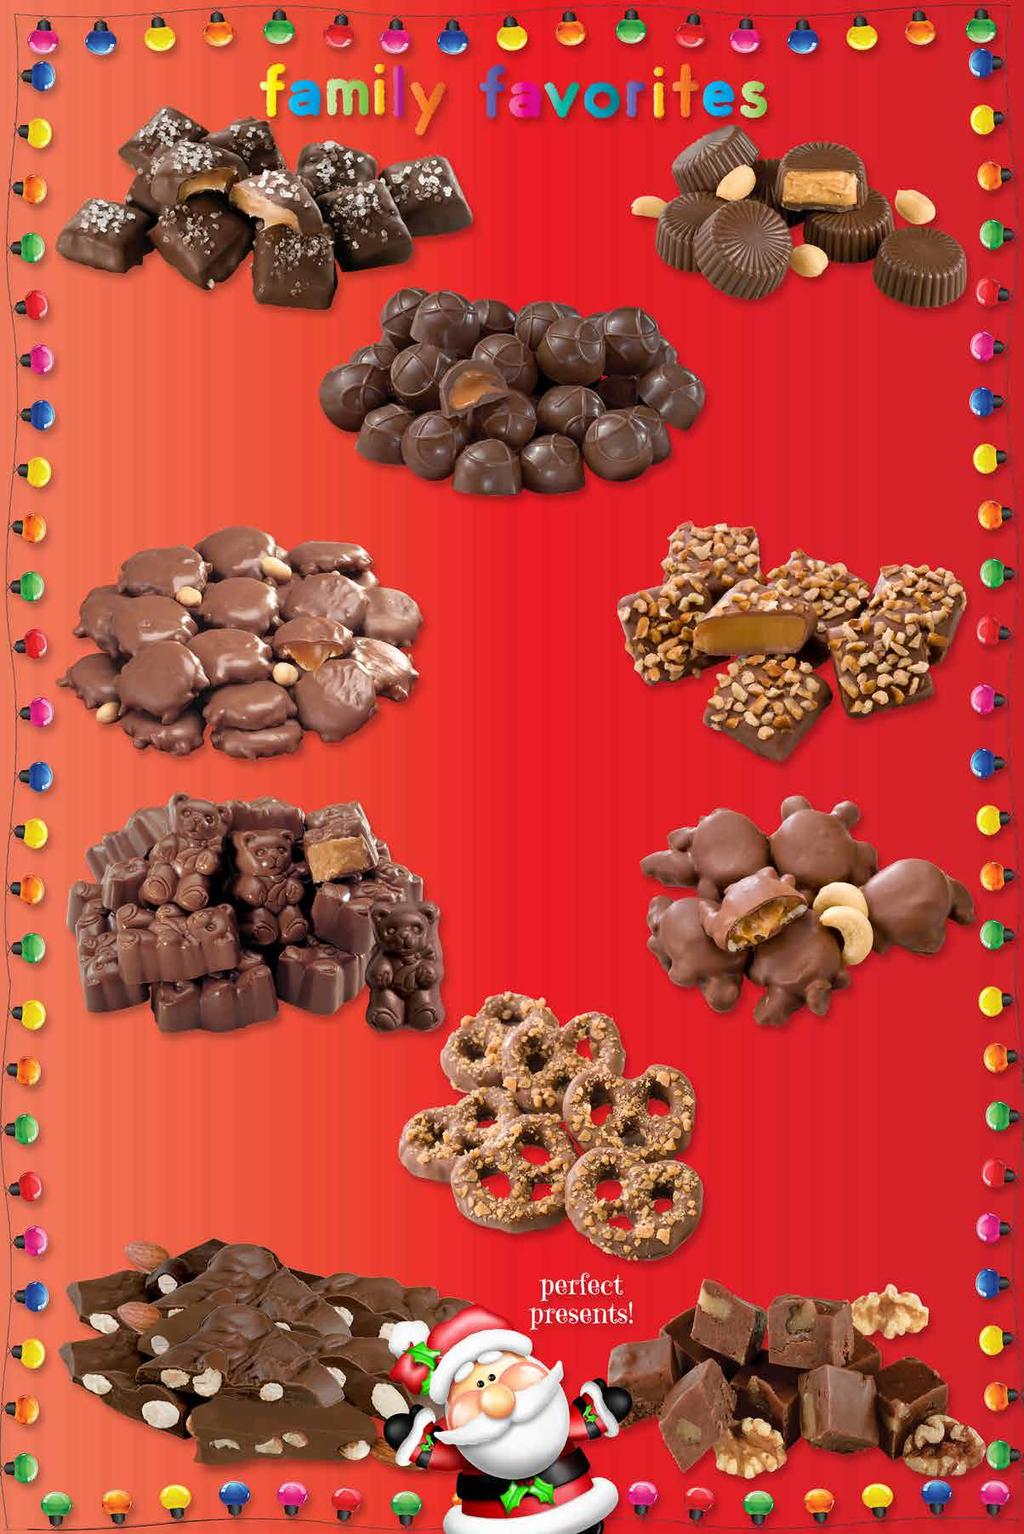 6 5672 5325 new! 5672 $11.00 Dark Chocolate Sea Salt Caramels Chocolates sal de mar caramelos Creamy, chewy caramel wrapped in rich dark chocolate and topped with sprinkles of sea salt. 6 oz. box.